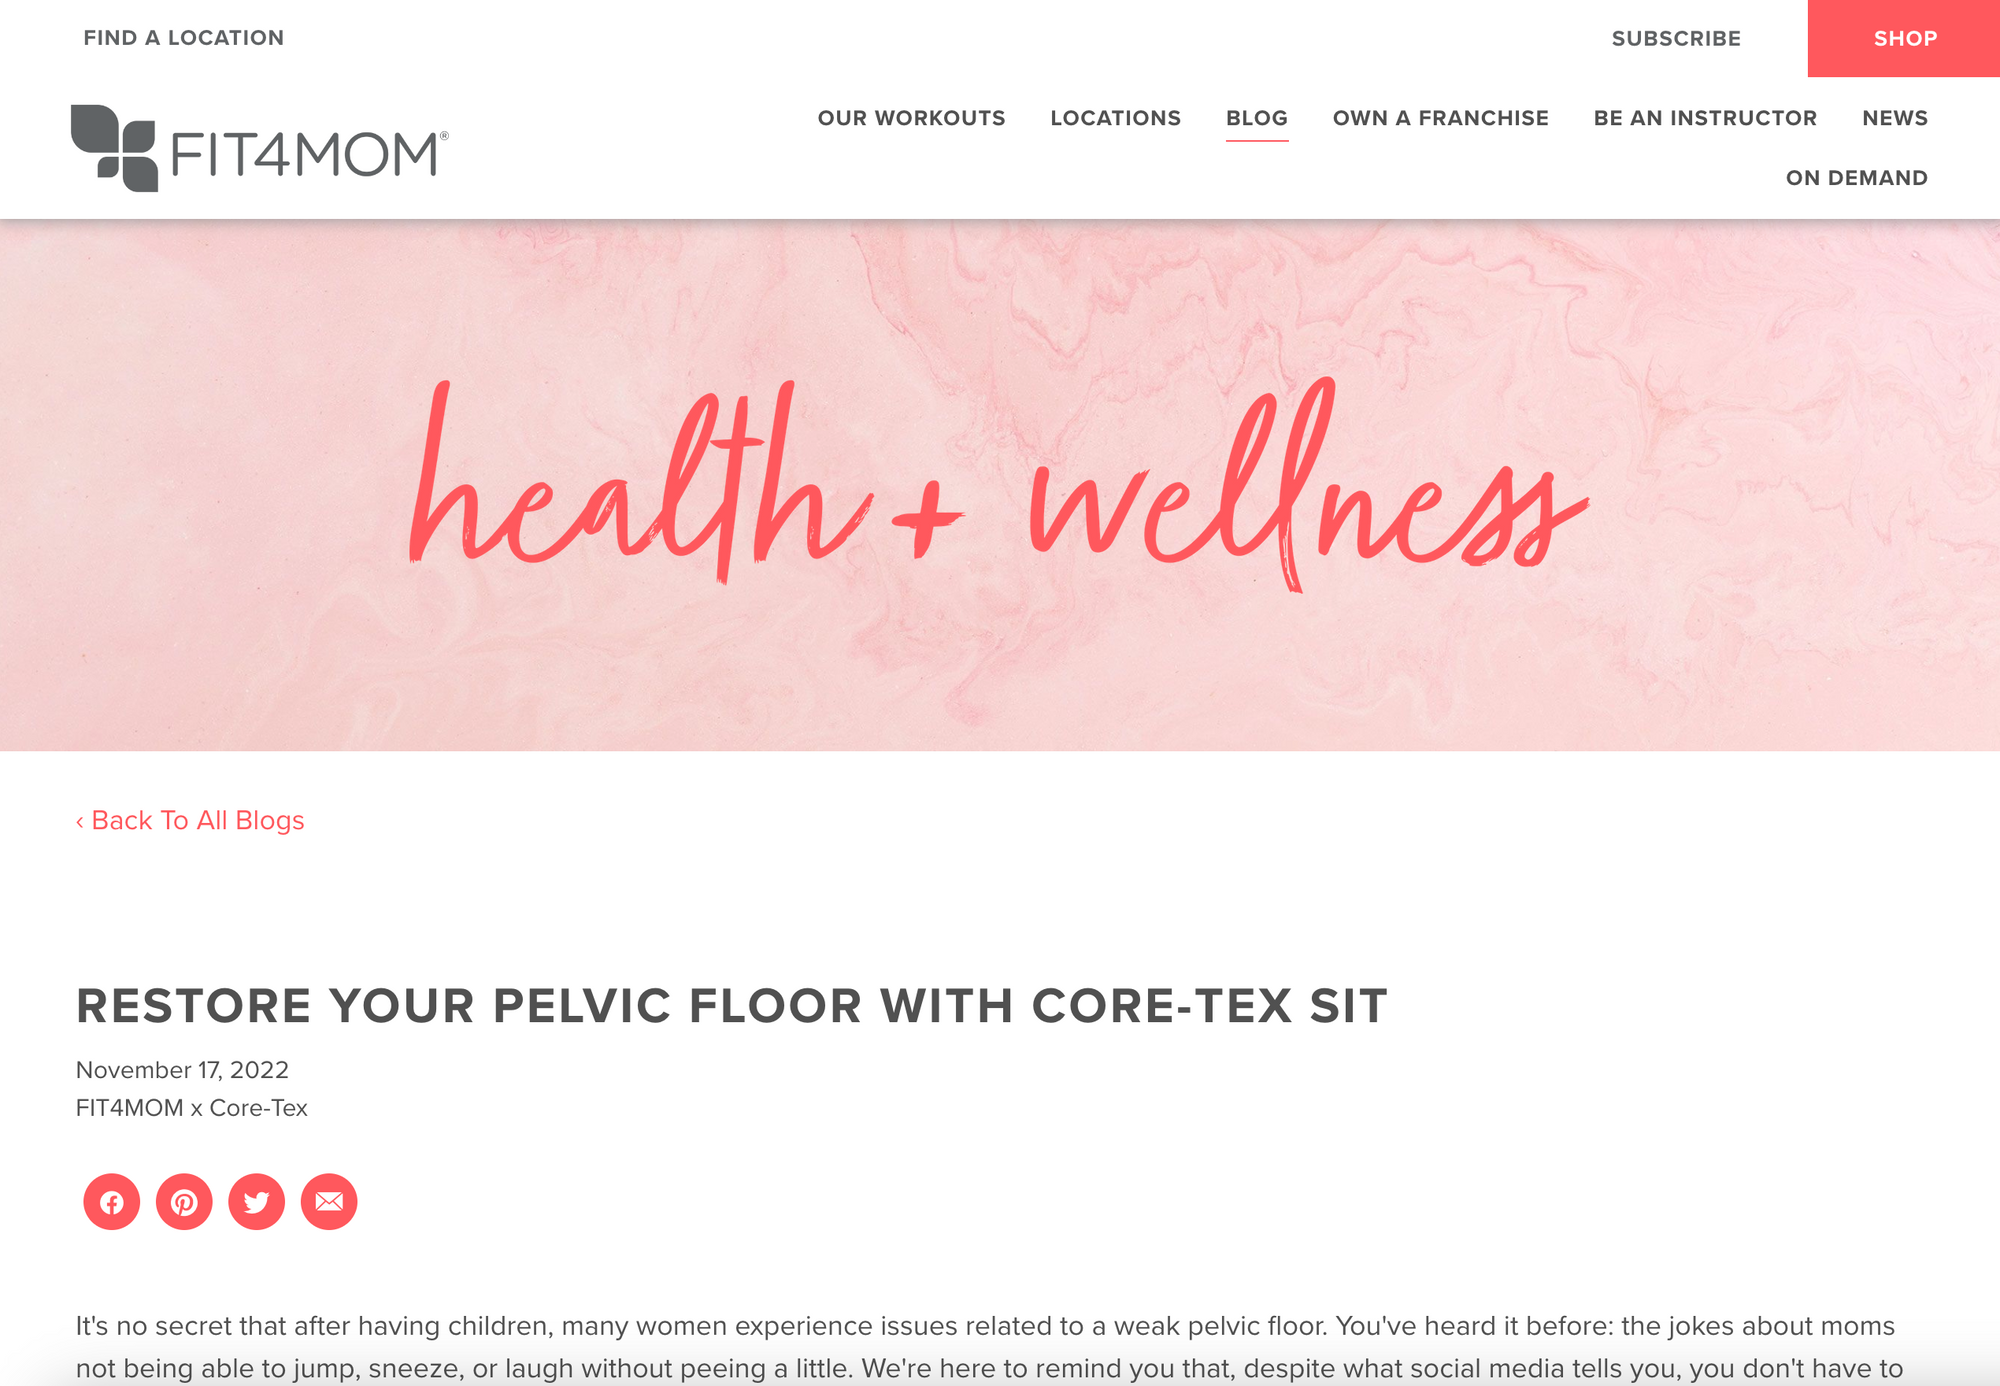 FIT4MOM - Restore Your Pelvic Floor With Core-Tex Sit